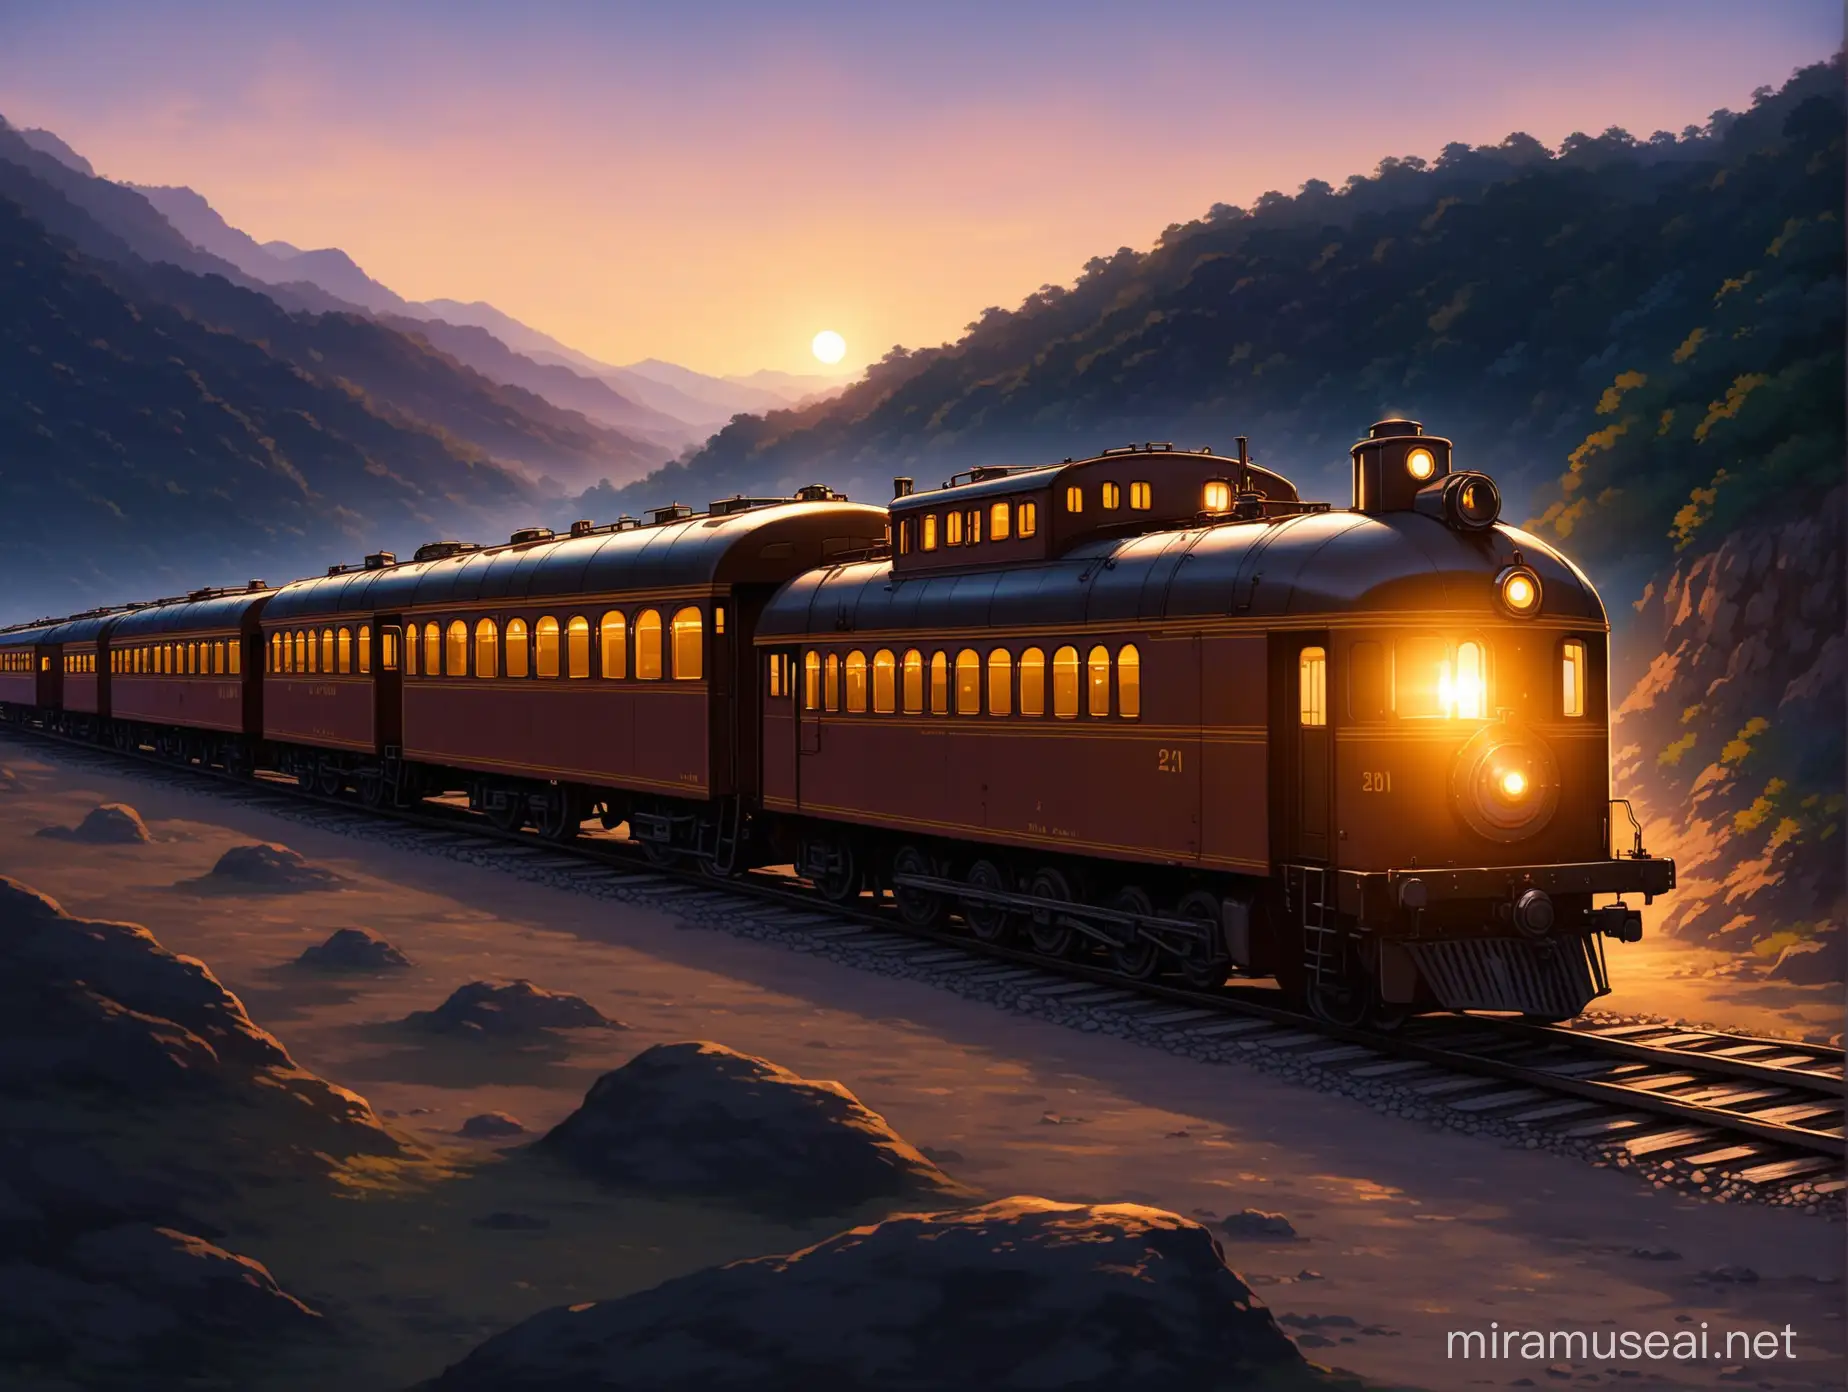 Vintage Train Emerging from a Cave at Dusk